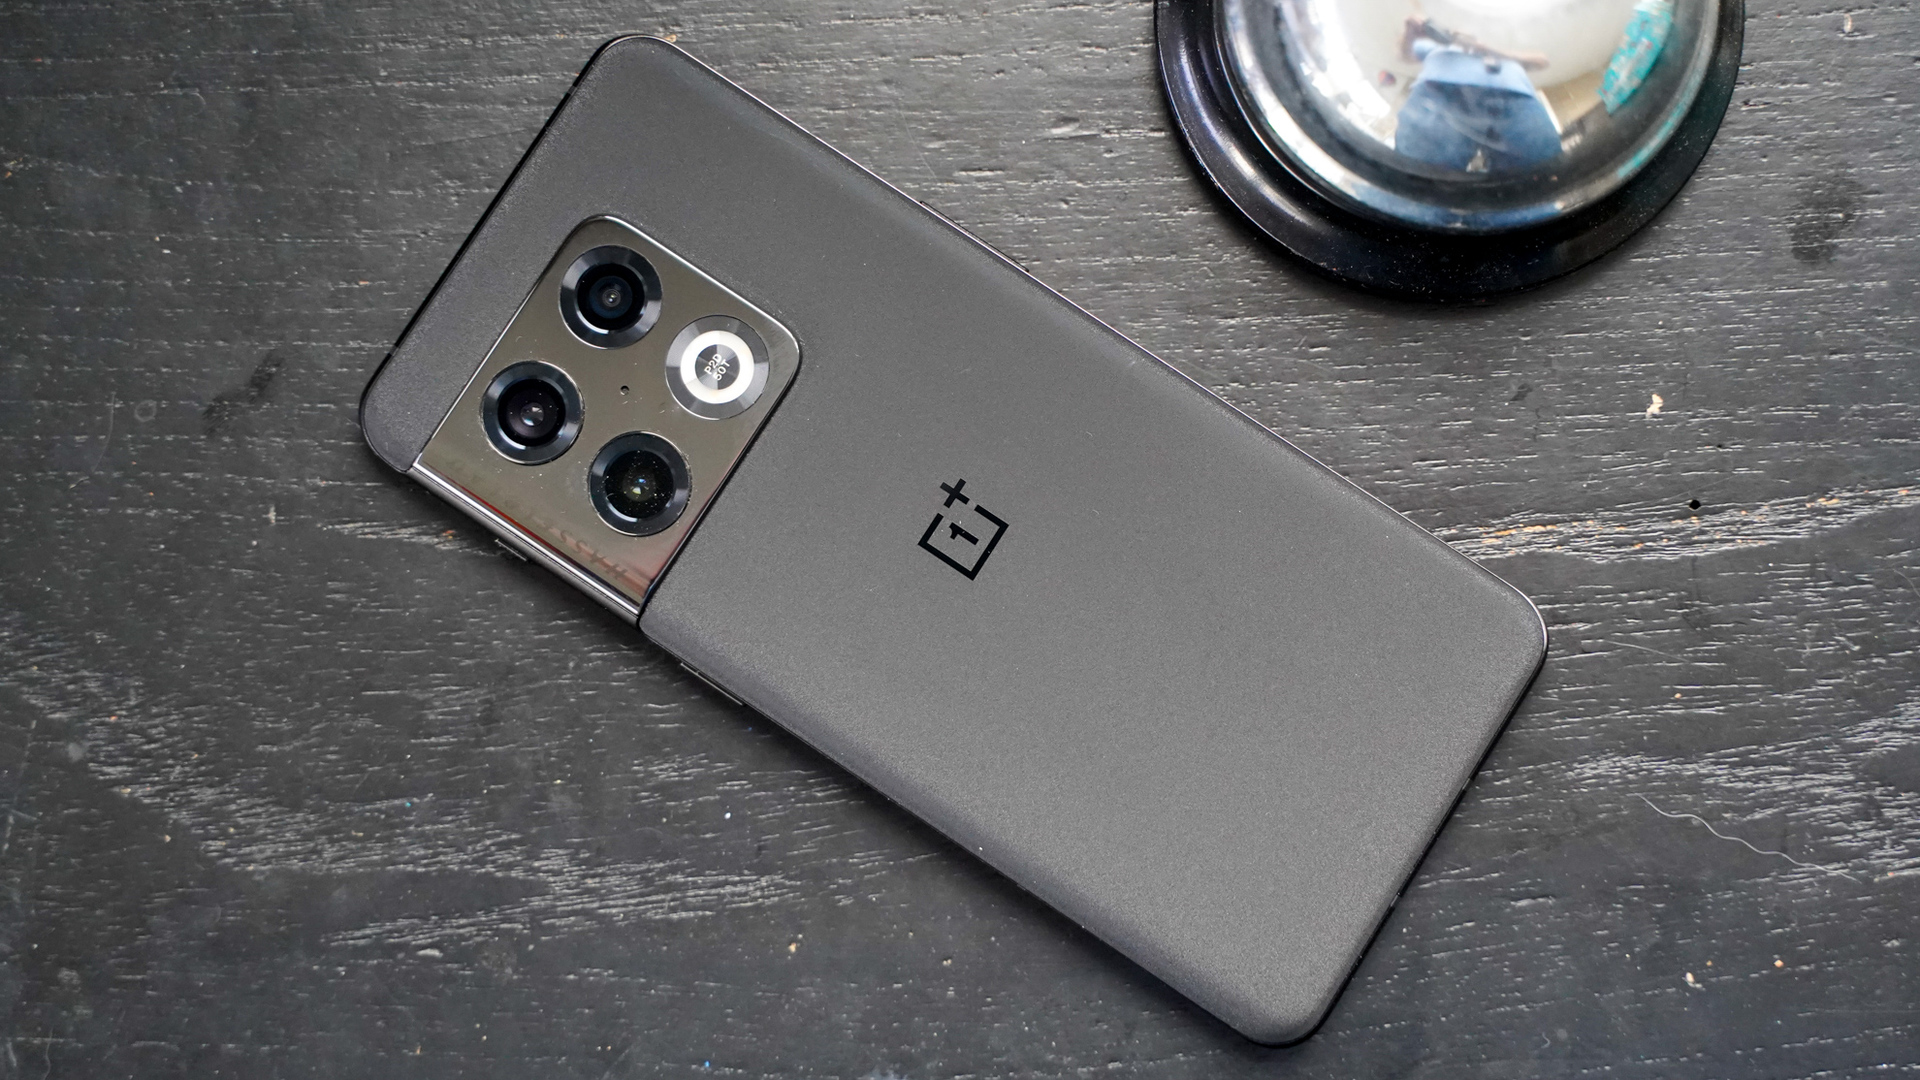 OnePlus 10 Pro face down showing rear of phone and camera module